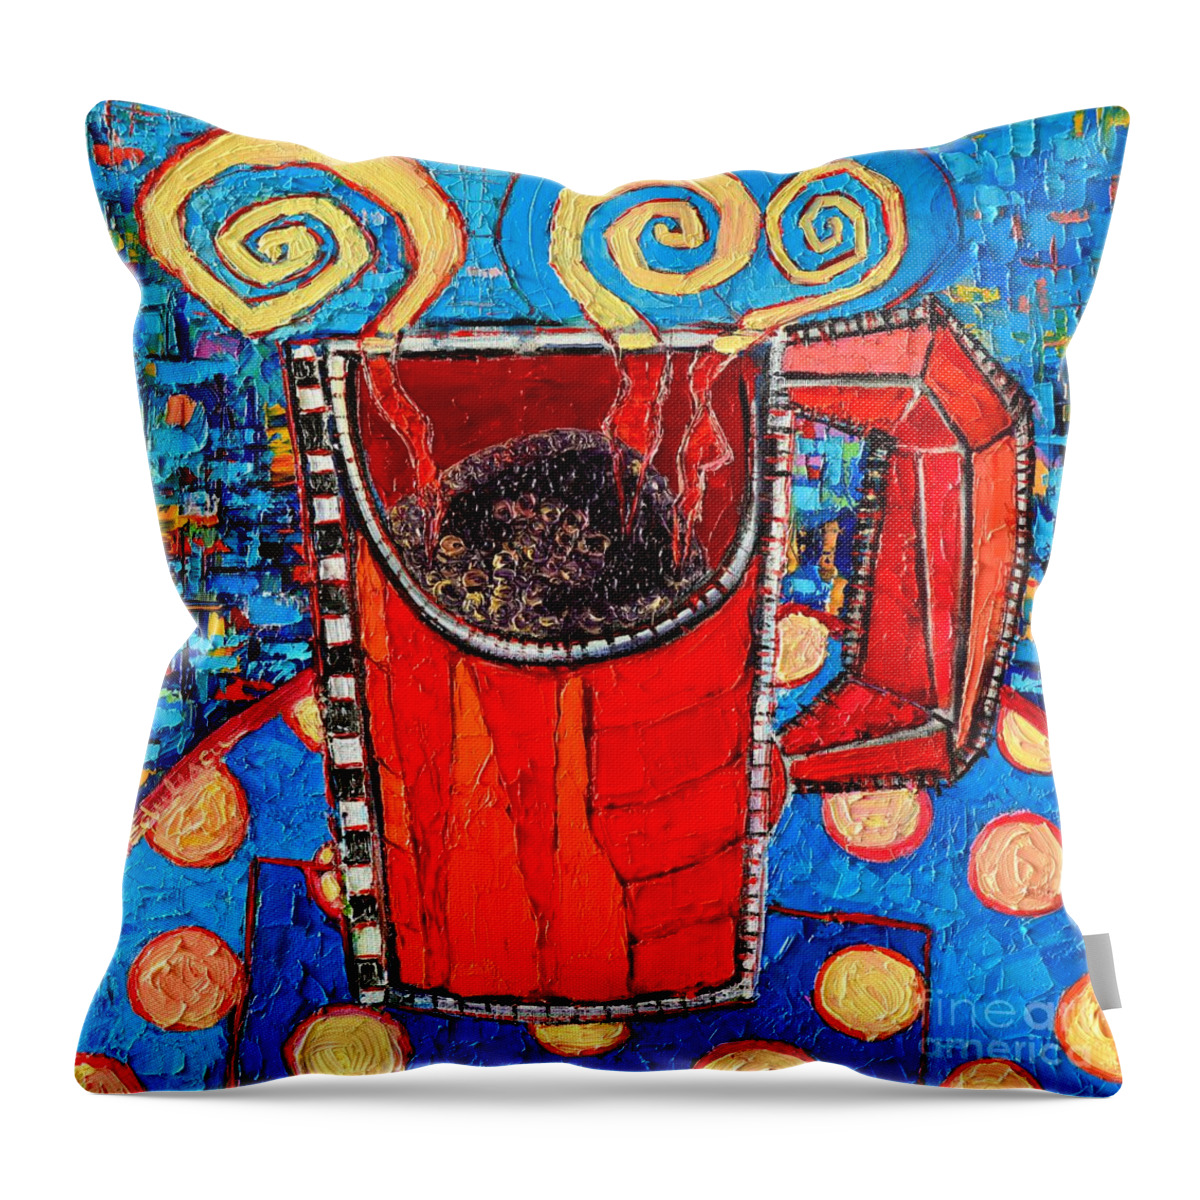 Coffee Throw Pillow featuring the painting Abstract Hot Coffee In Red Mug by Ana Maria Edulescu